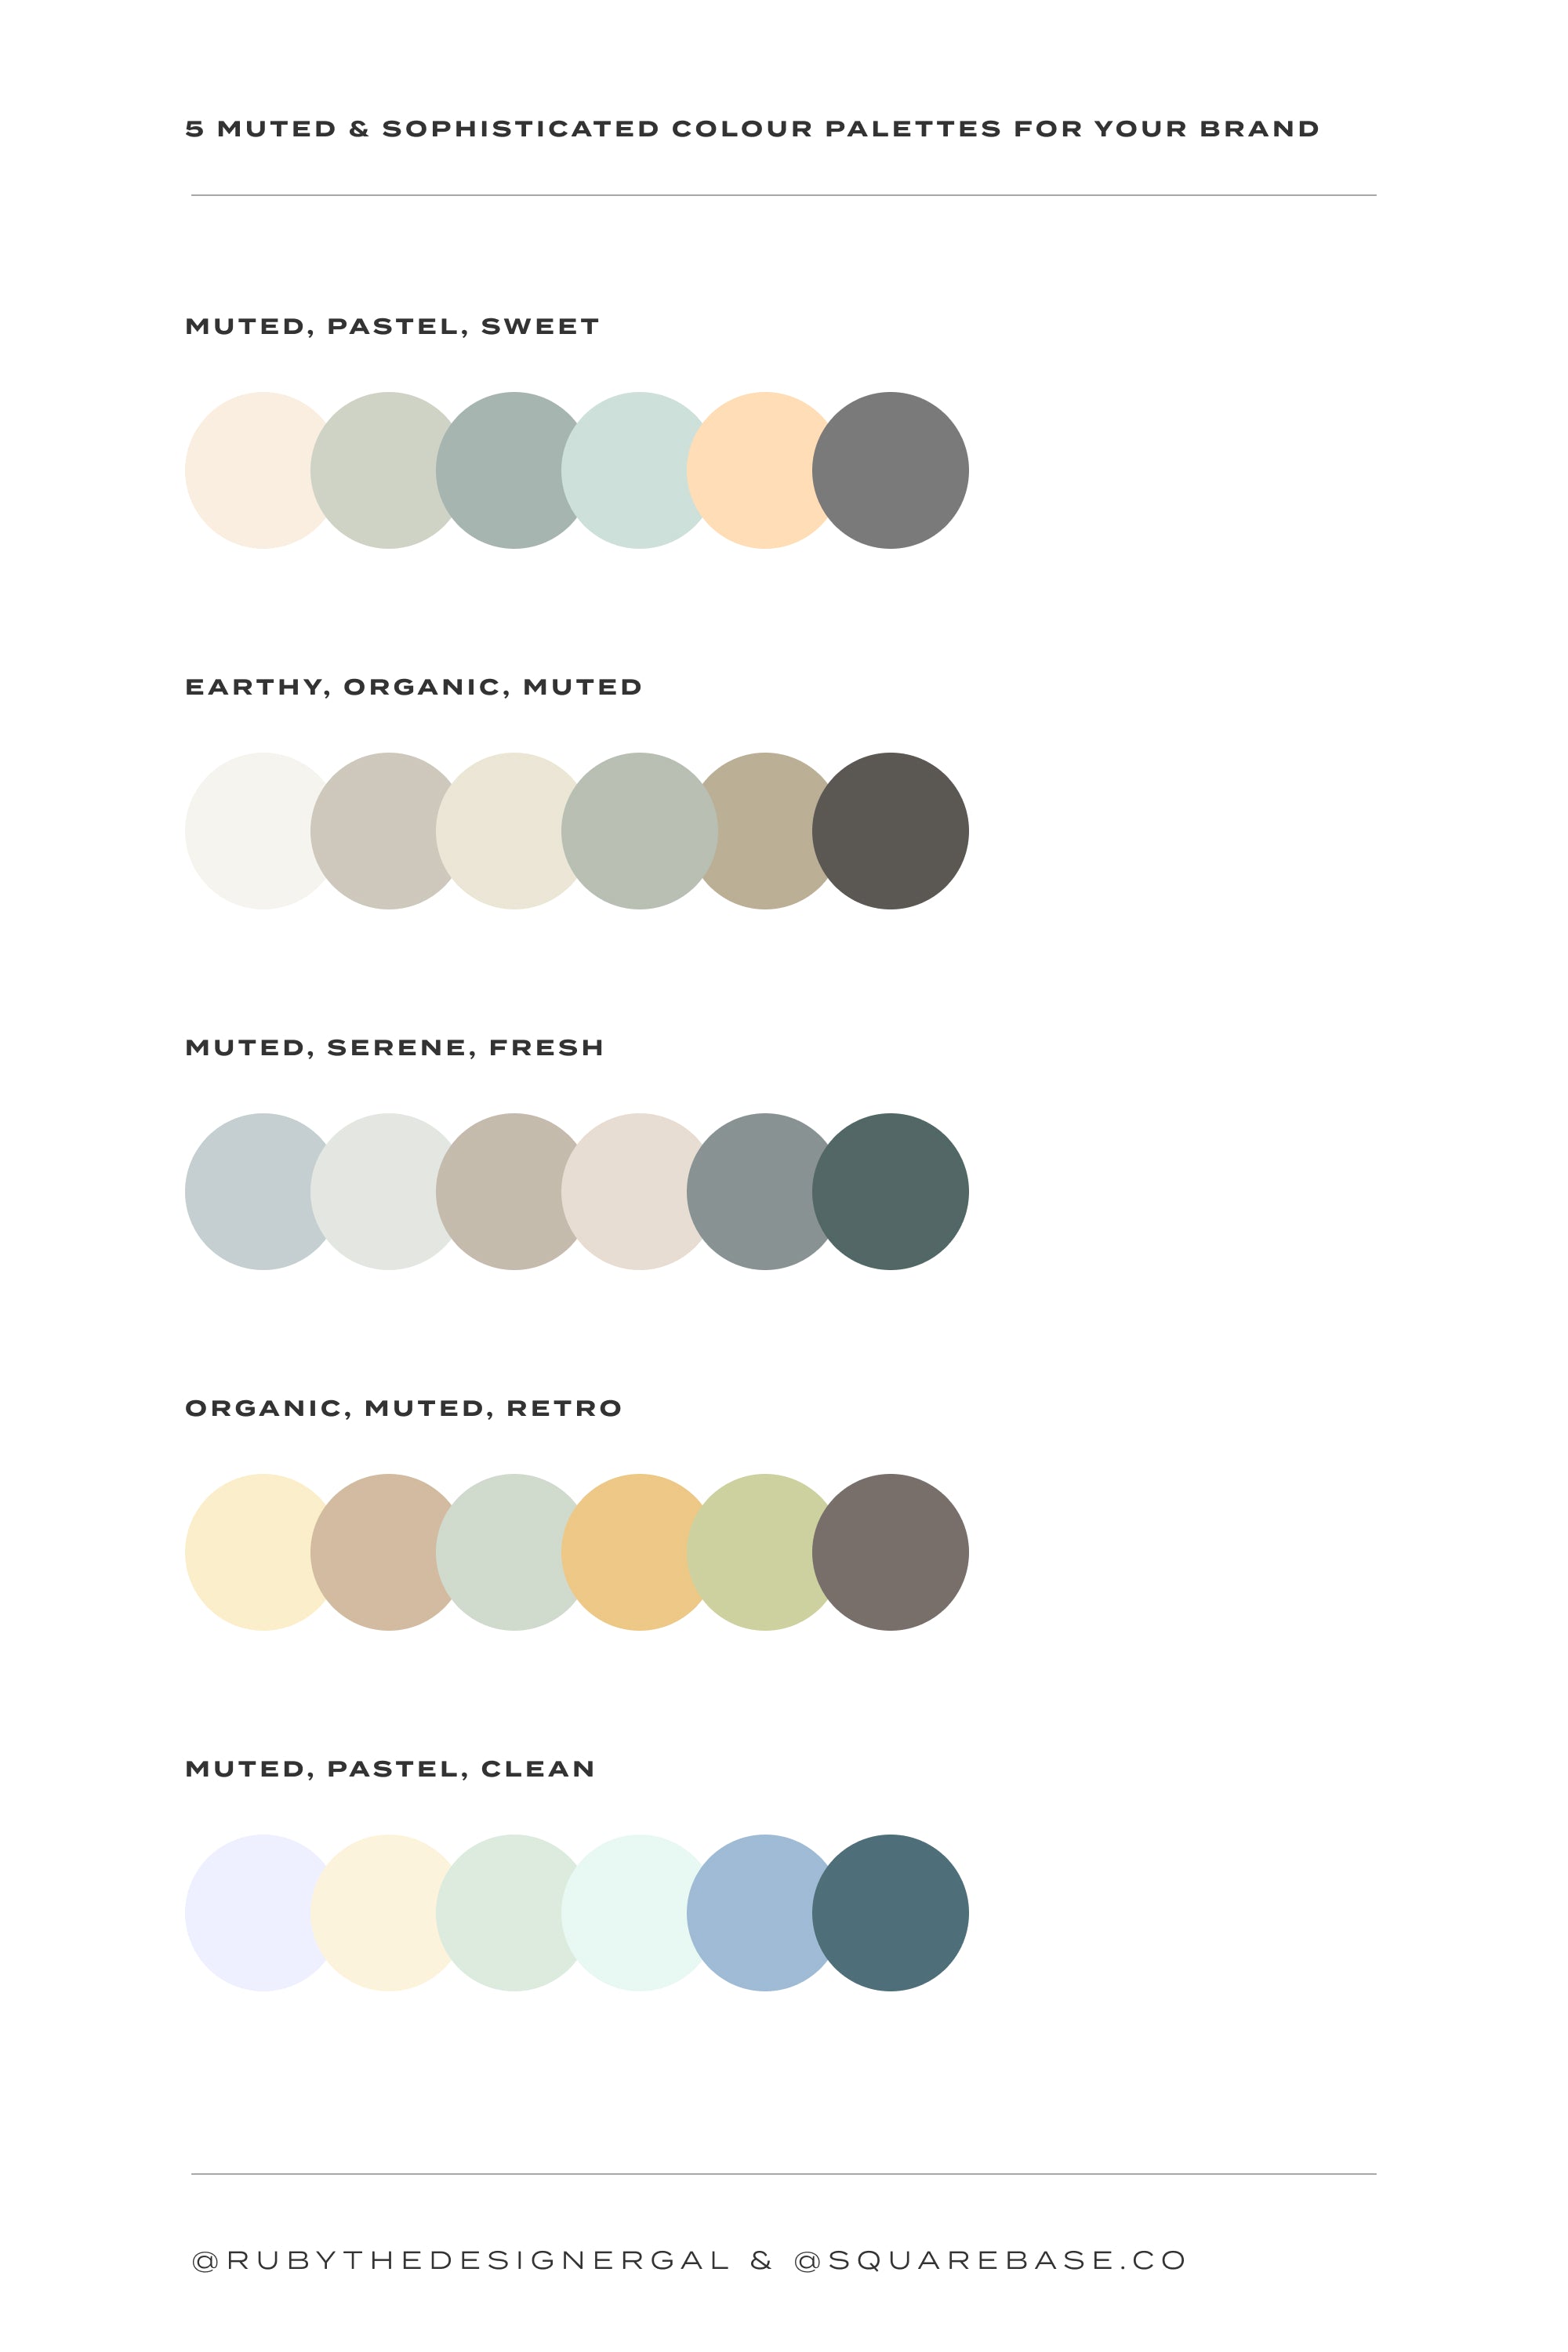 Muted and sophisticated colour palettes for your brand | Brand Design 